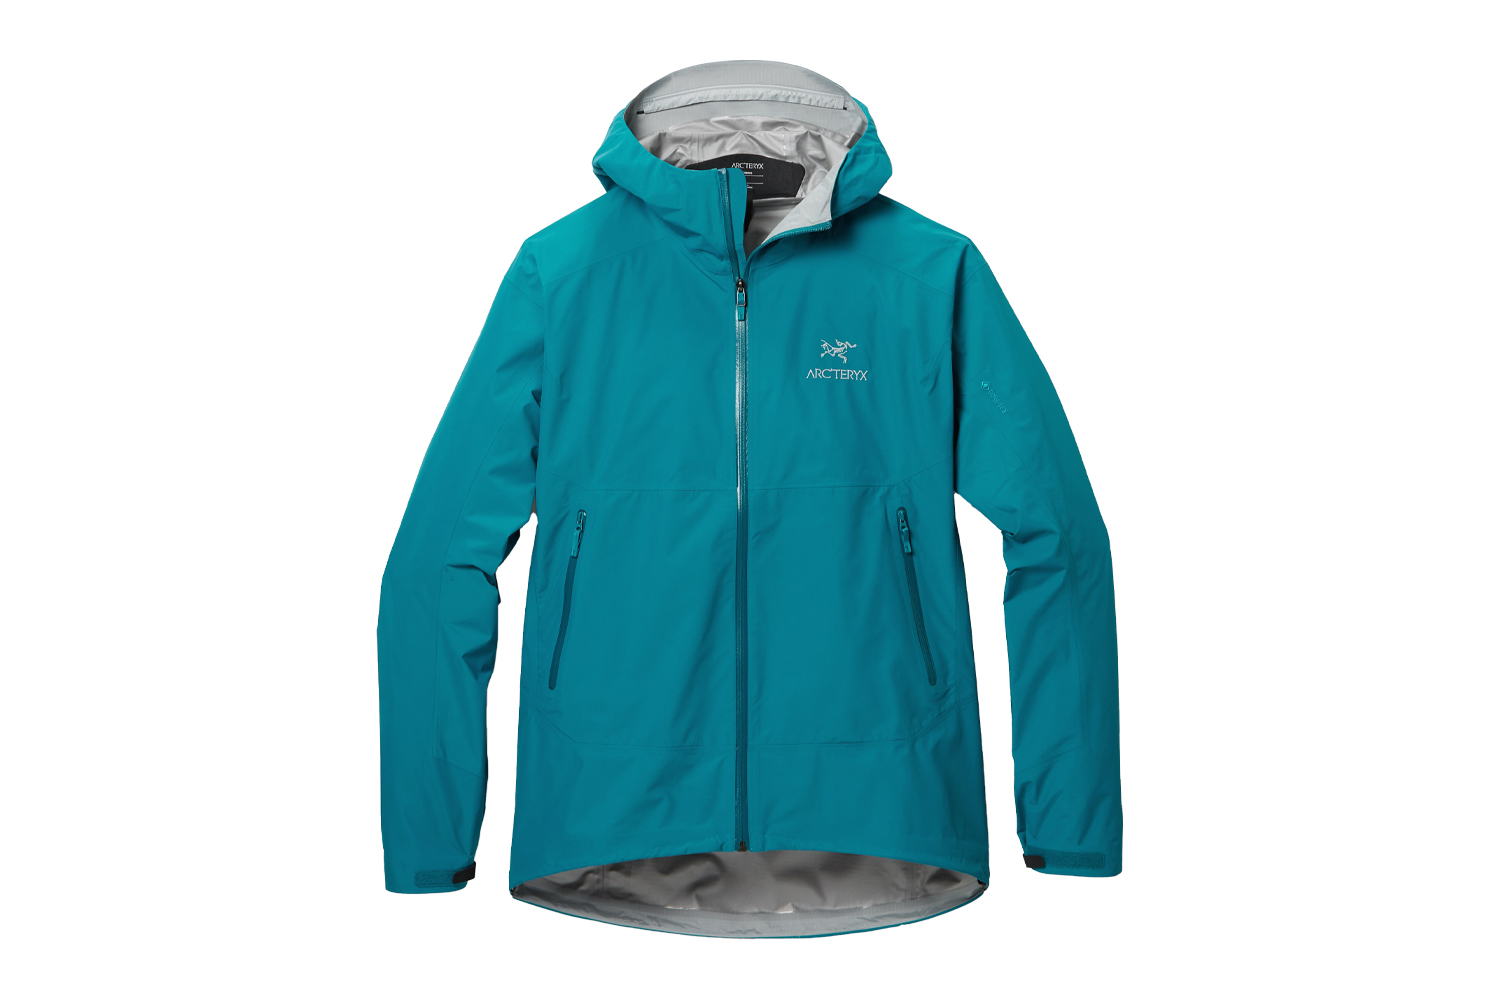 The Arc'teryx Zeta SL Rain Jacket is the best performance rain jacket in 2022 for those in the midst of activity in the rain